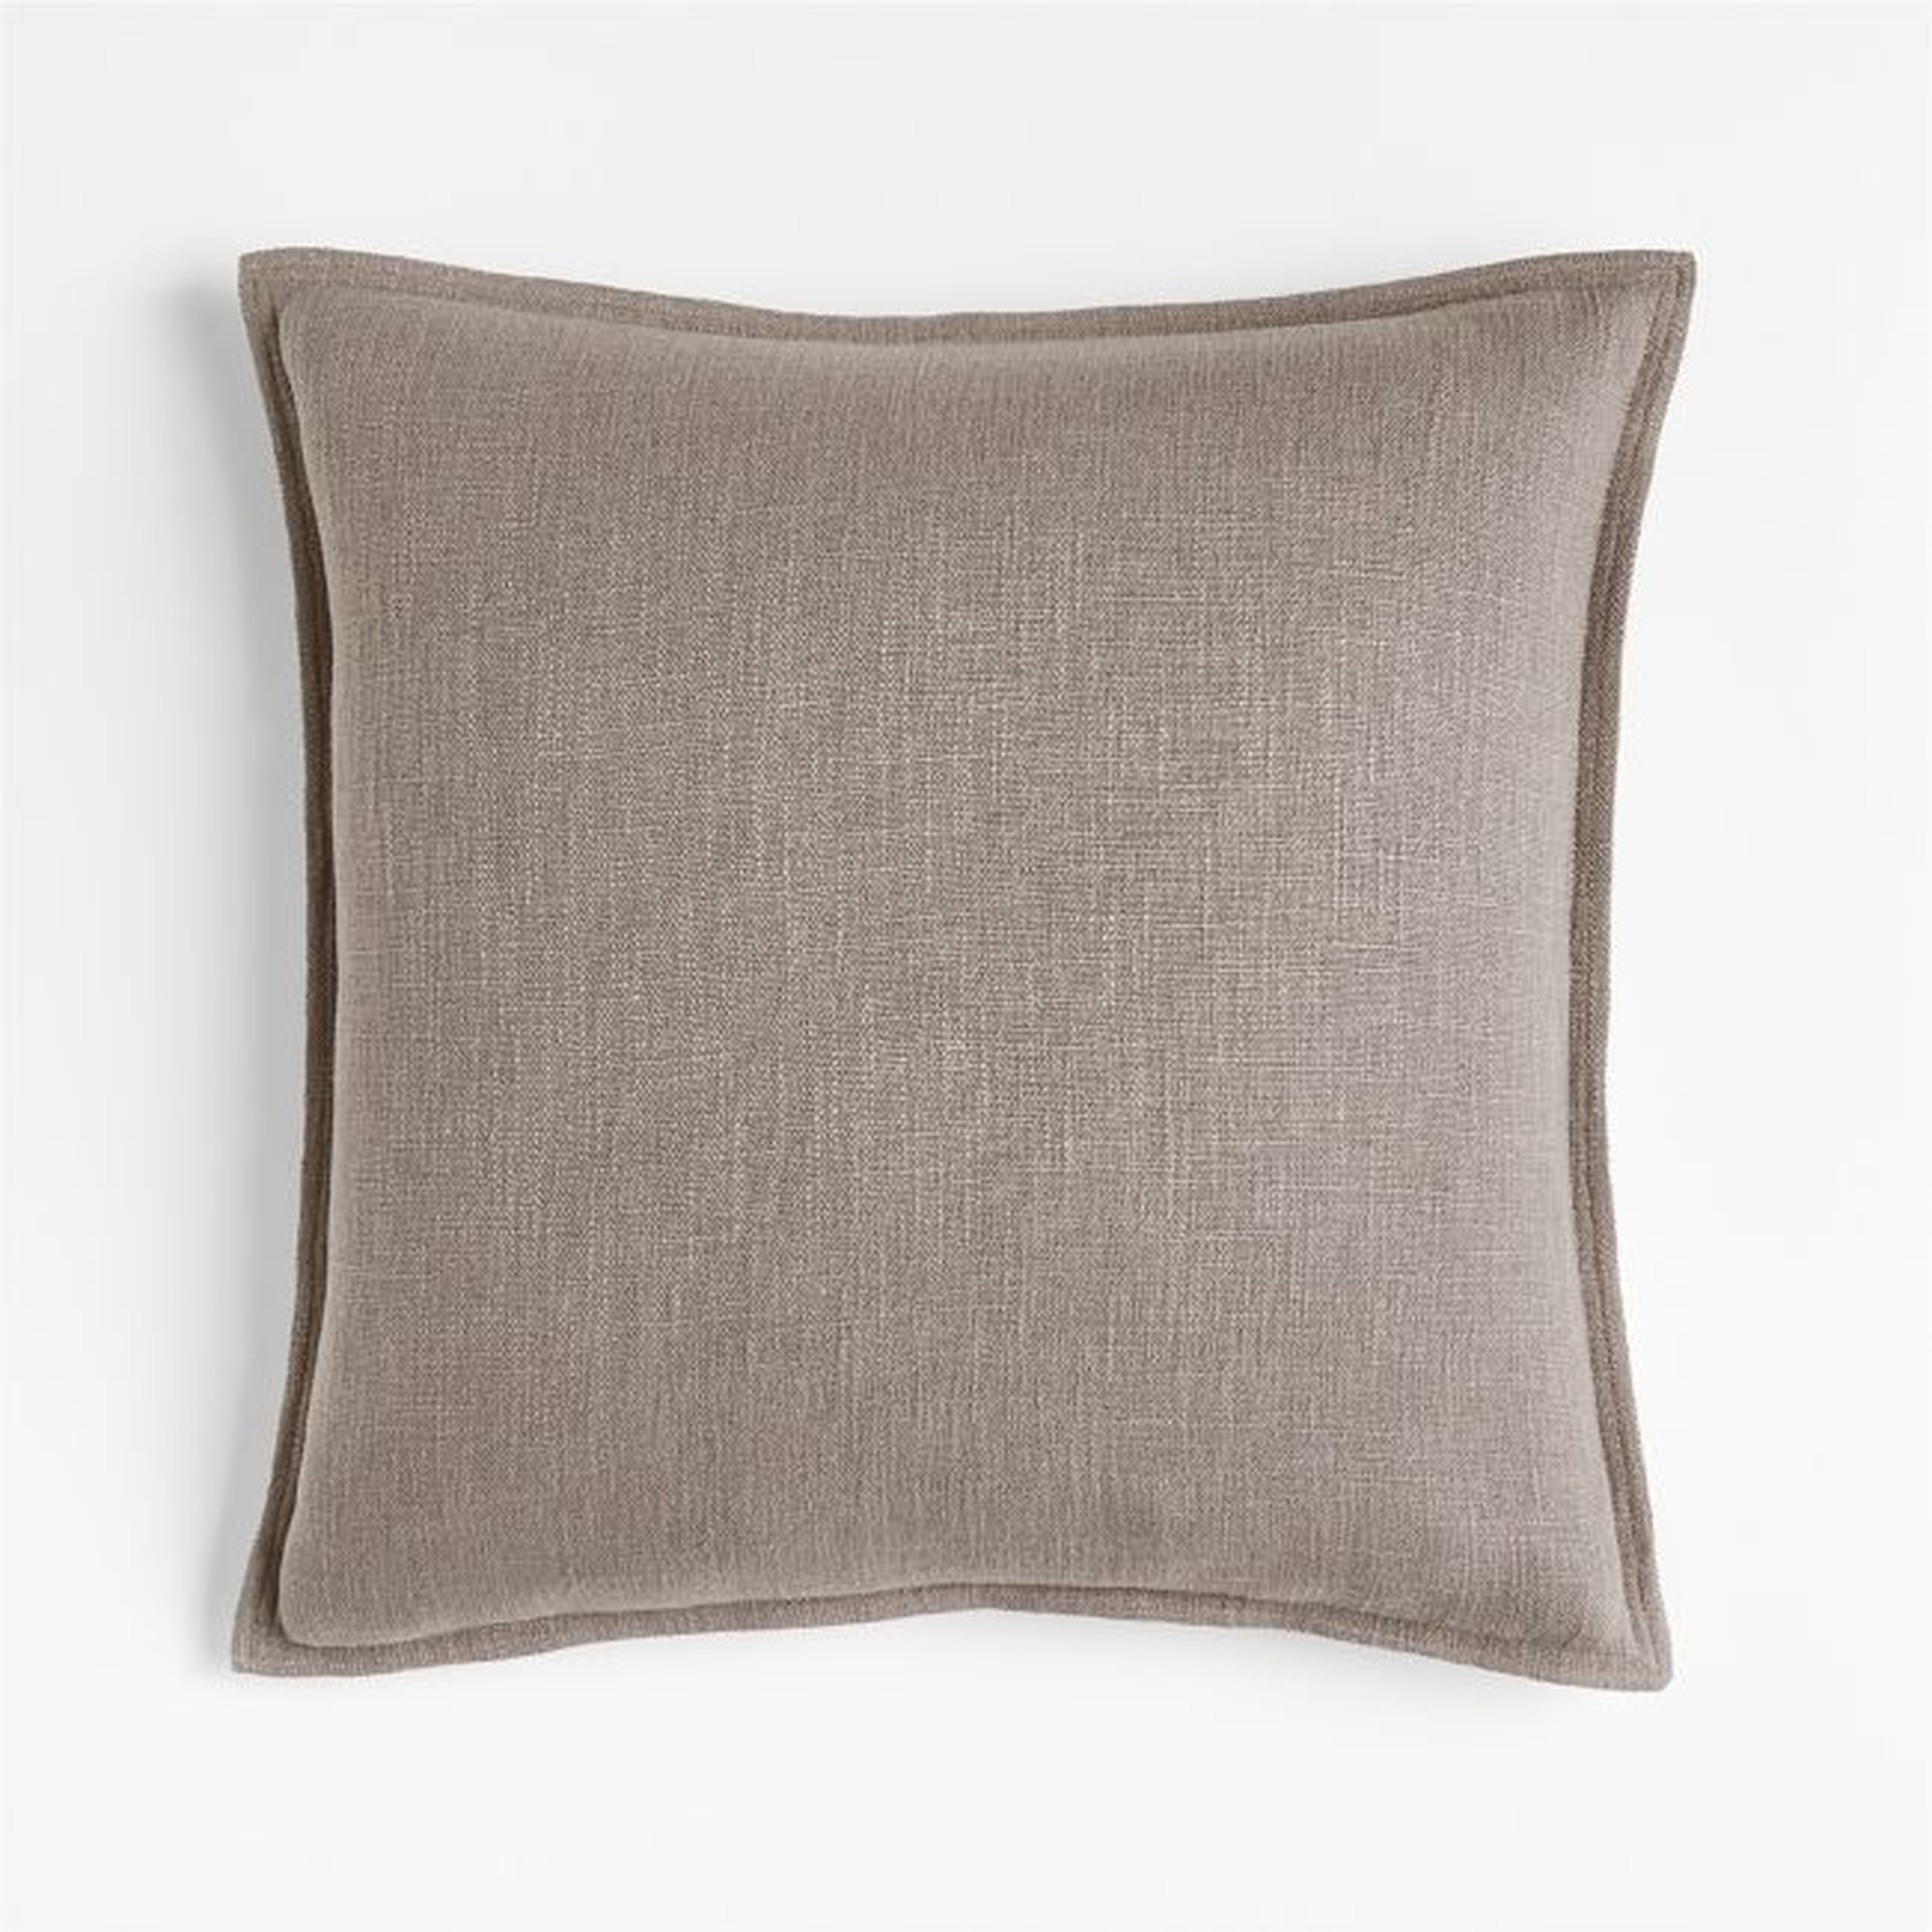 Dark Grey 20"x20" Laundered Linen Throw Pillow with Down-Alternative Insert - Crate and Barrel